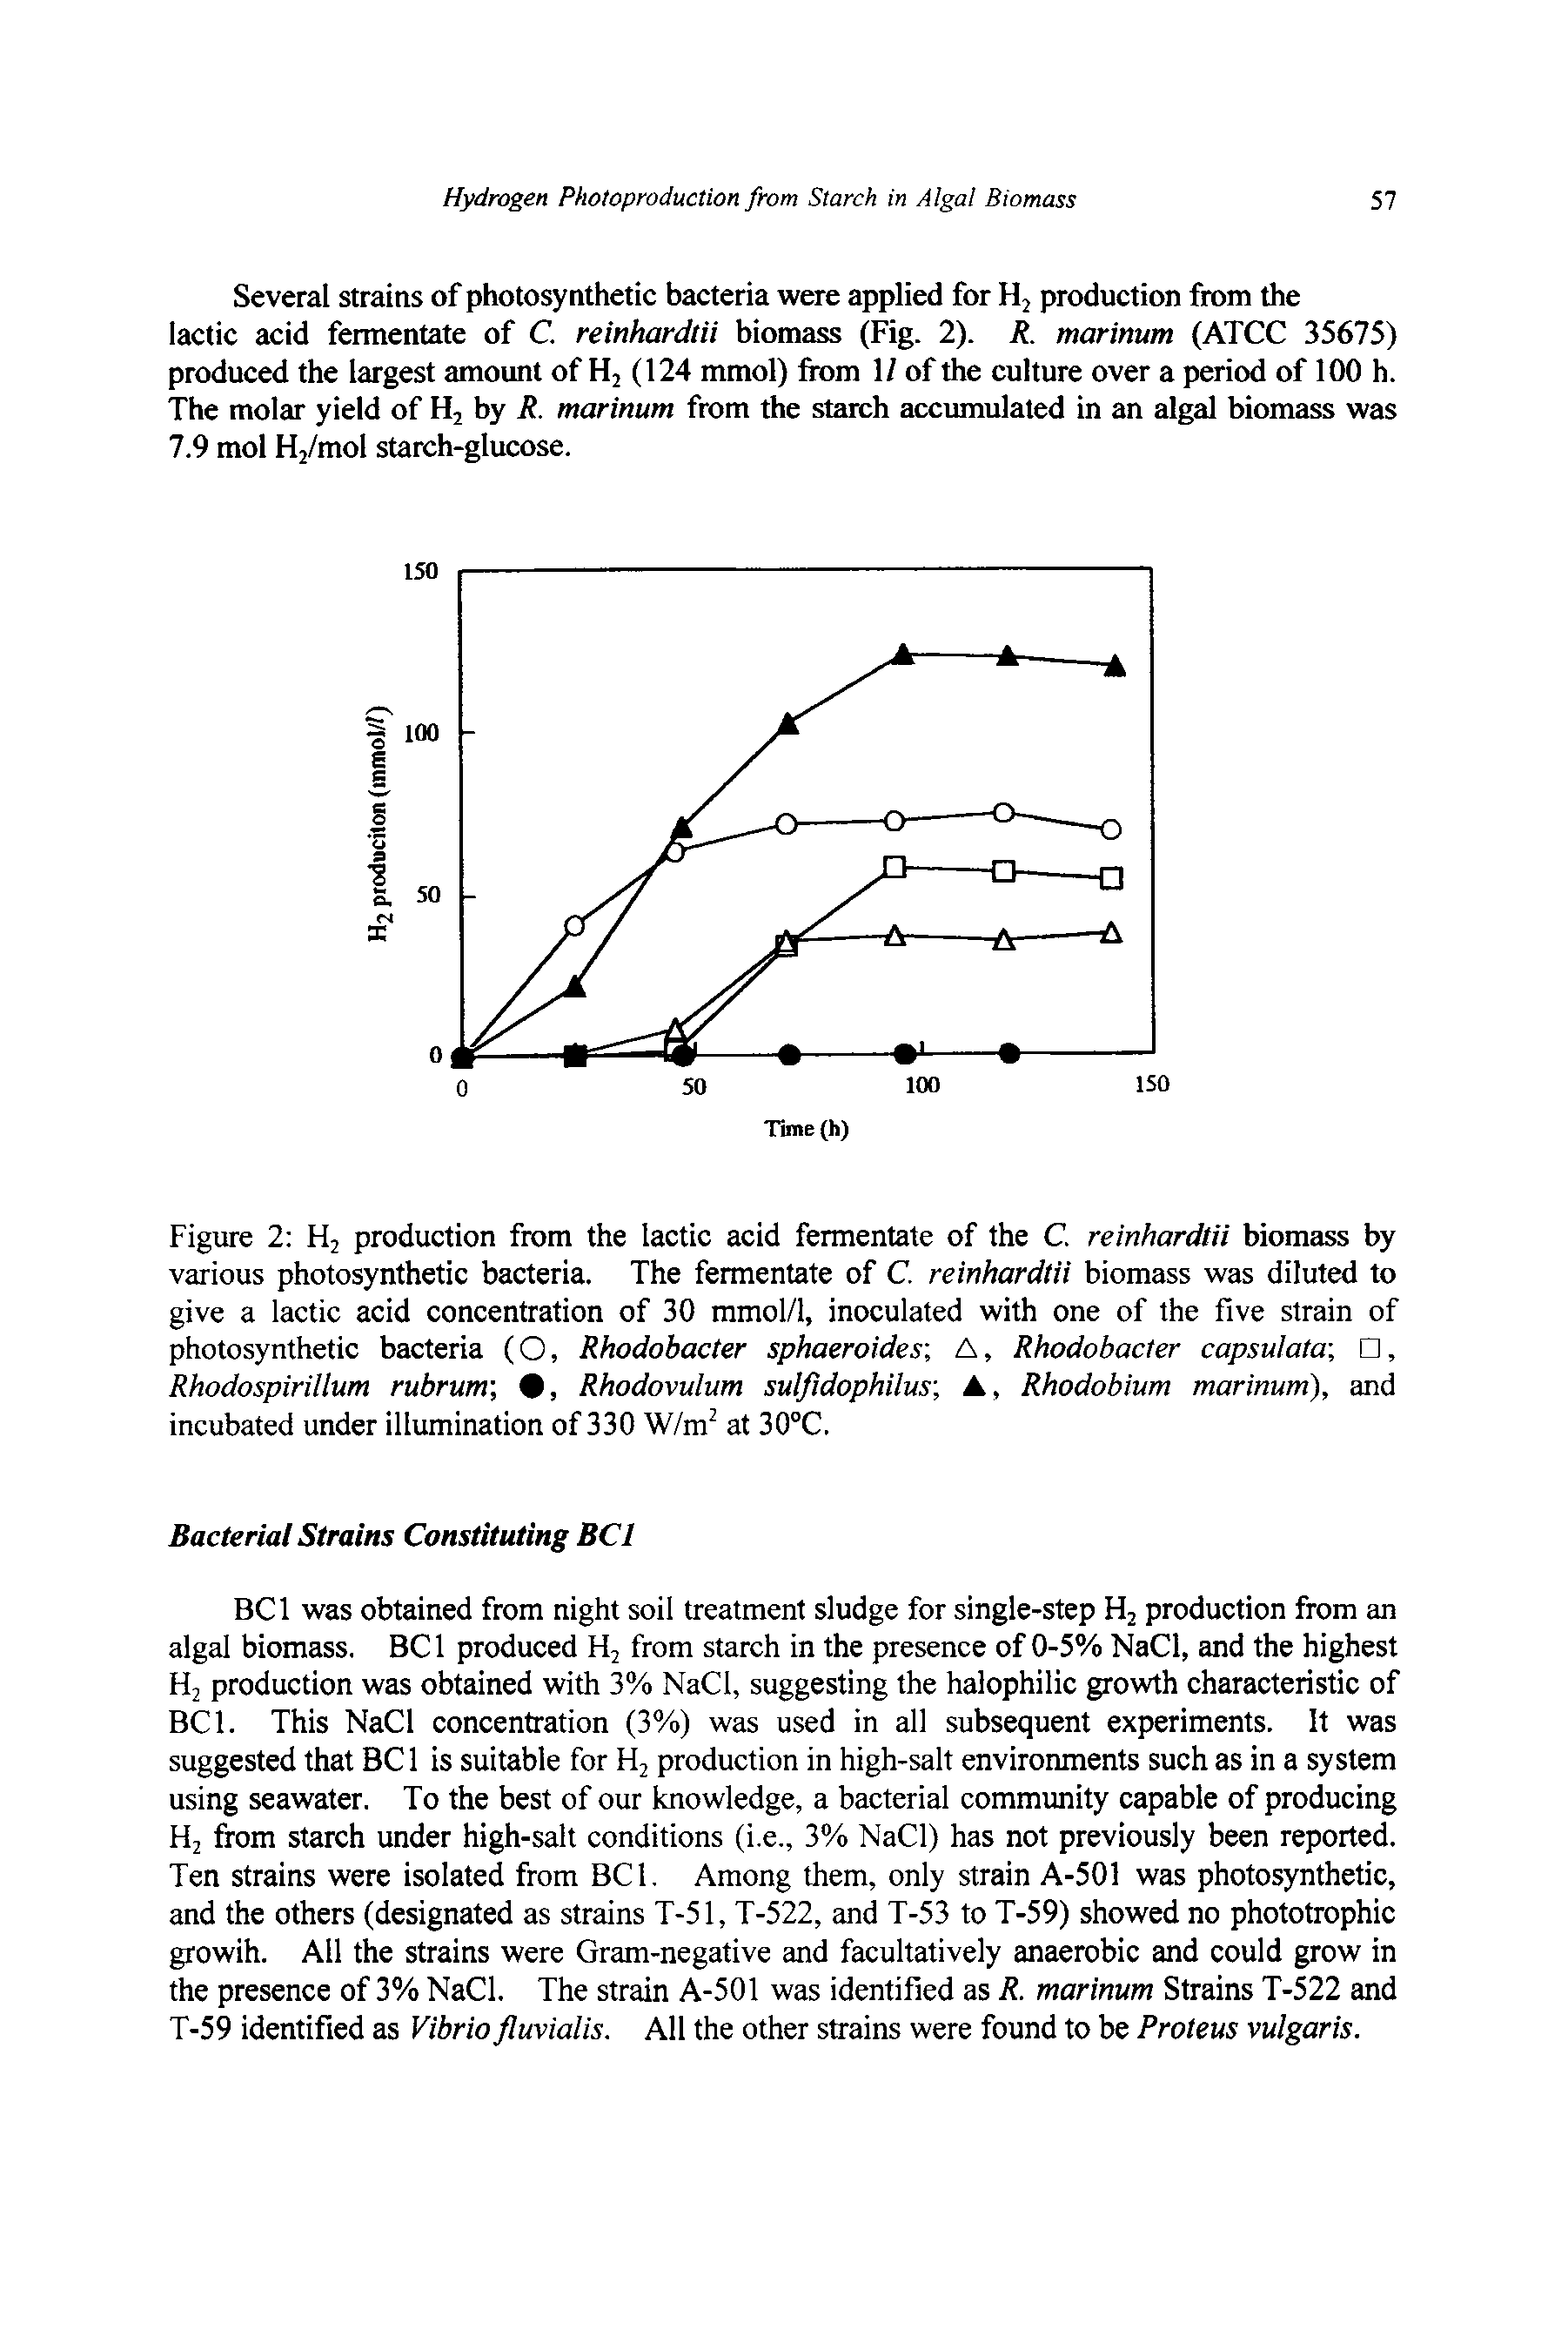 Figure 2 H2 production from the lactic acid fermentate of the C. reinhardtii biomass by various photosynthetic bacteria. The fermentate of C. reinhardtii biomass was diluted to give a lactic acid concentration of 30 mmol/1, inoculated with one of the five strain of photosynthetic bacteria (O, Rhodobacter sphaeroides A, Rhodobacter capsulata , Rhodospirillum rubrum 9, Rhodovulum sulfidophilus , Rhodobium marinum), and incubated under illumination of 330 W/m2 at 30°C.